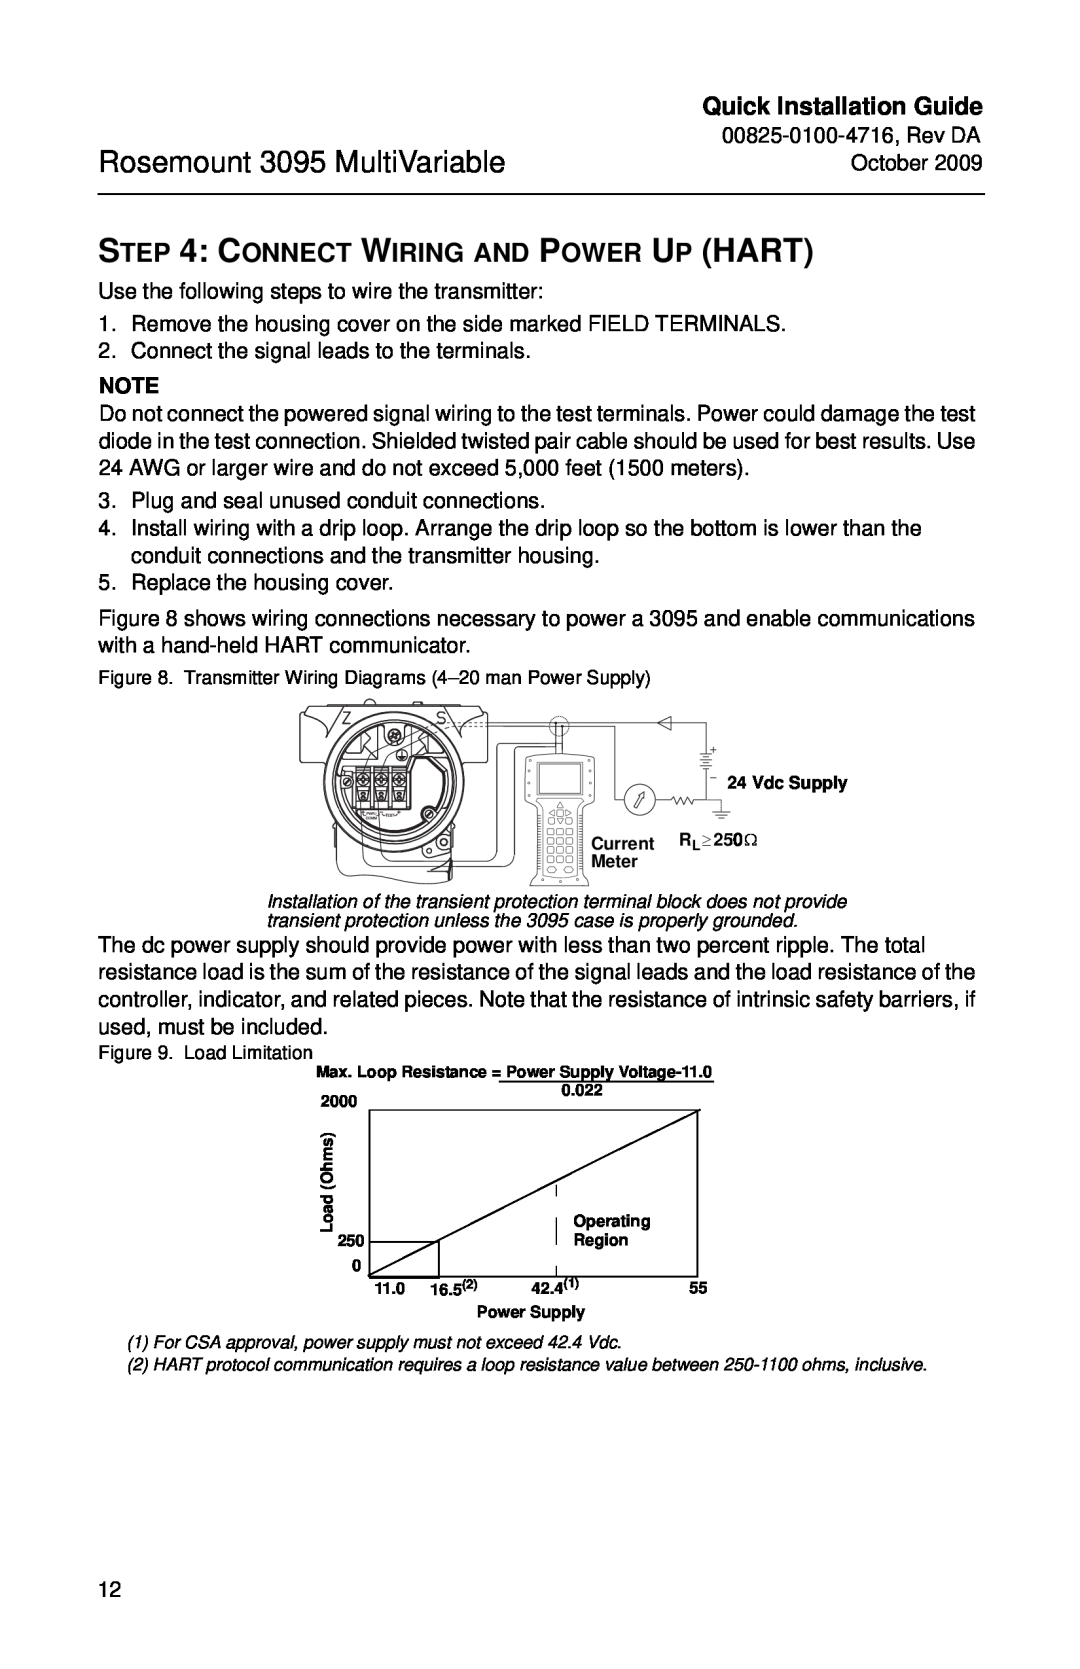 Emerson 00825-0100-4716 manual Connect Wiring And Power Up Hart, Rosemount 3095 MultiVariable, Quick Installation Guide 